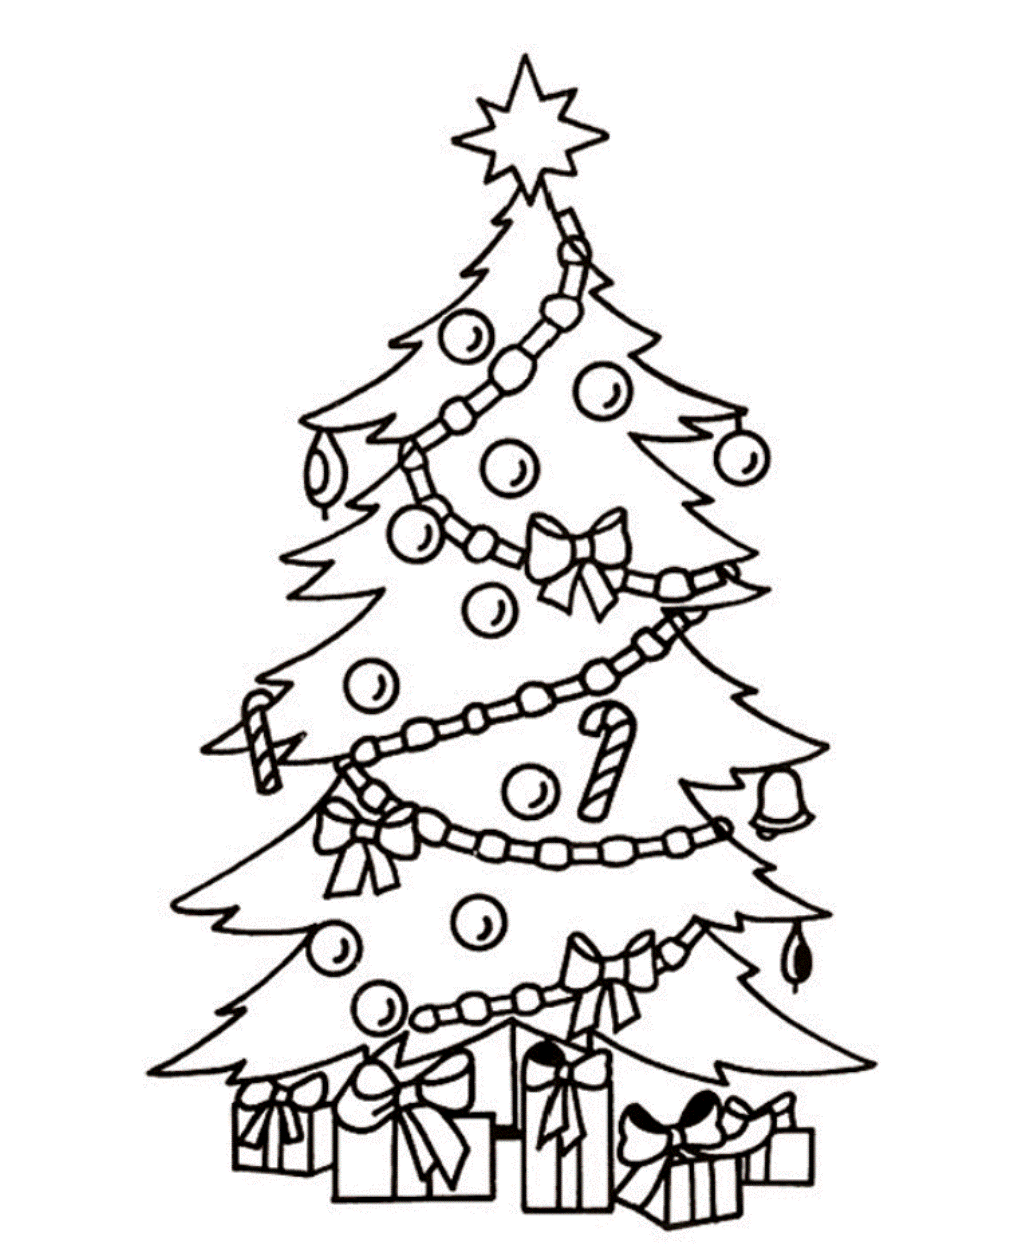 Christmas Tree And Present Coloring Page